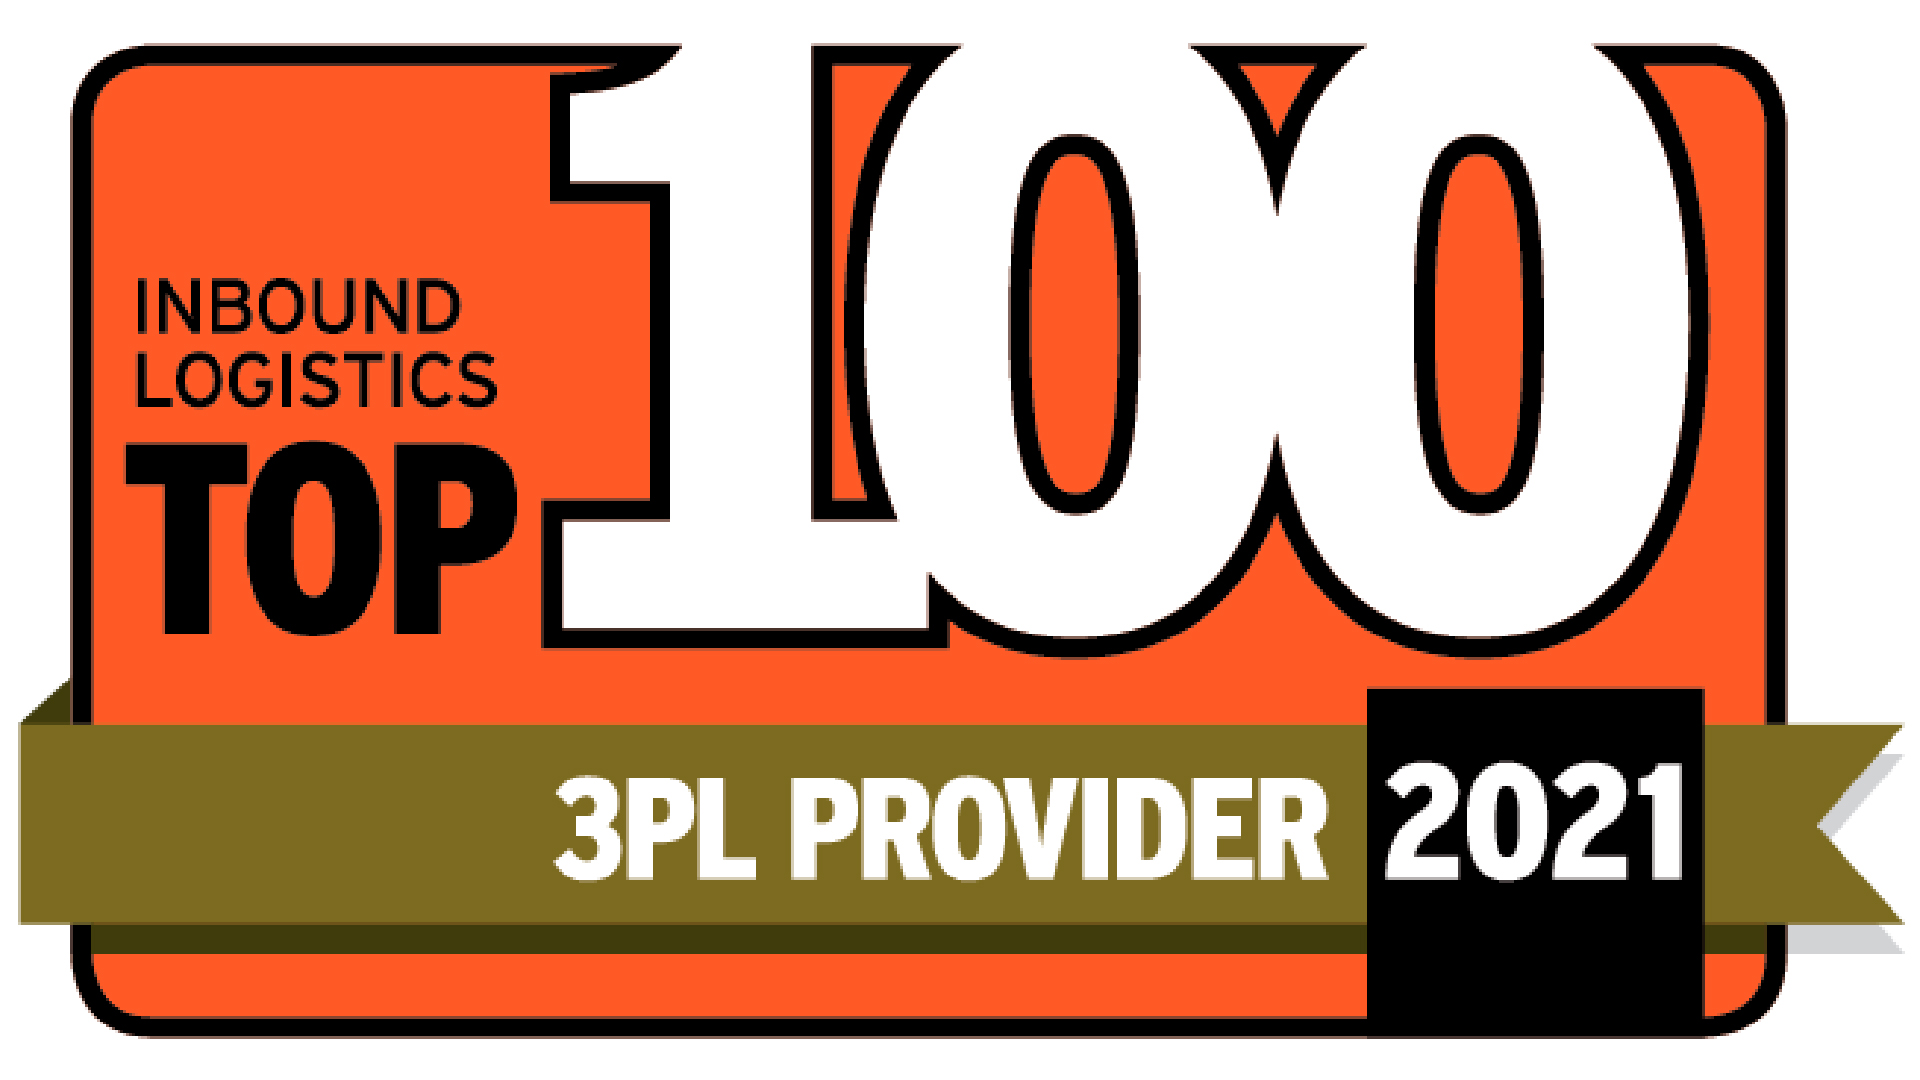 GEODIS Selected as a Top 100 3PL Provider for 2021 by Inbound Logistics ...